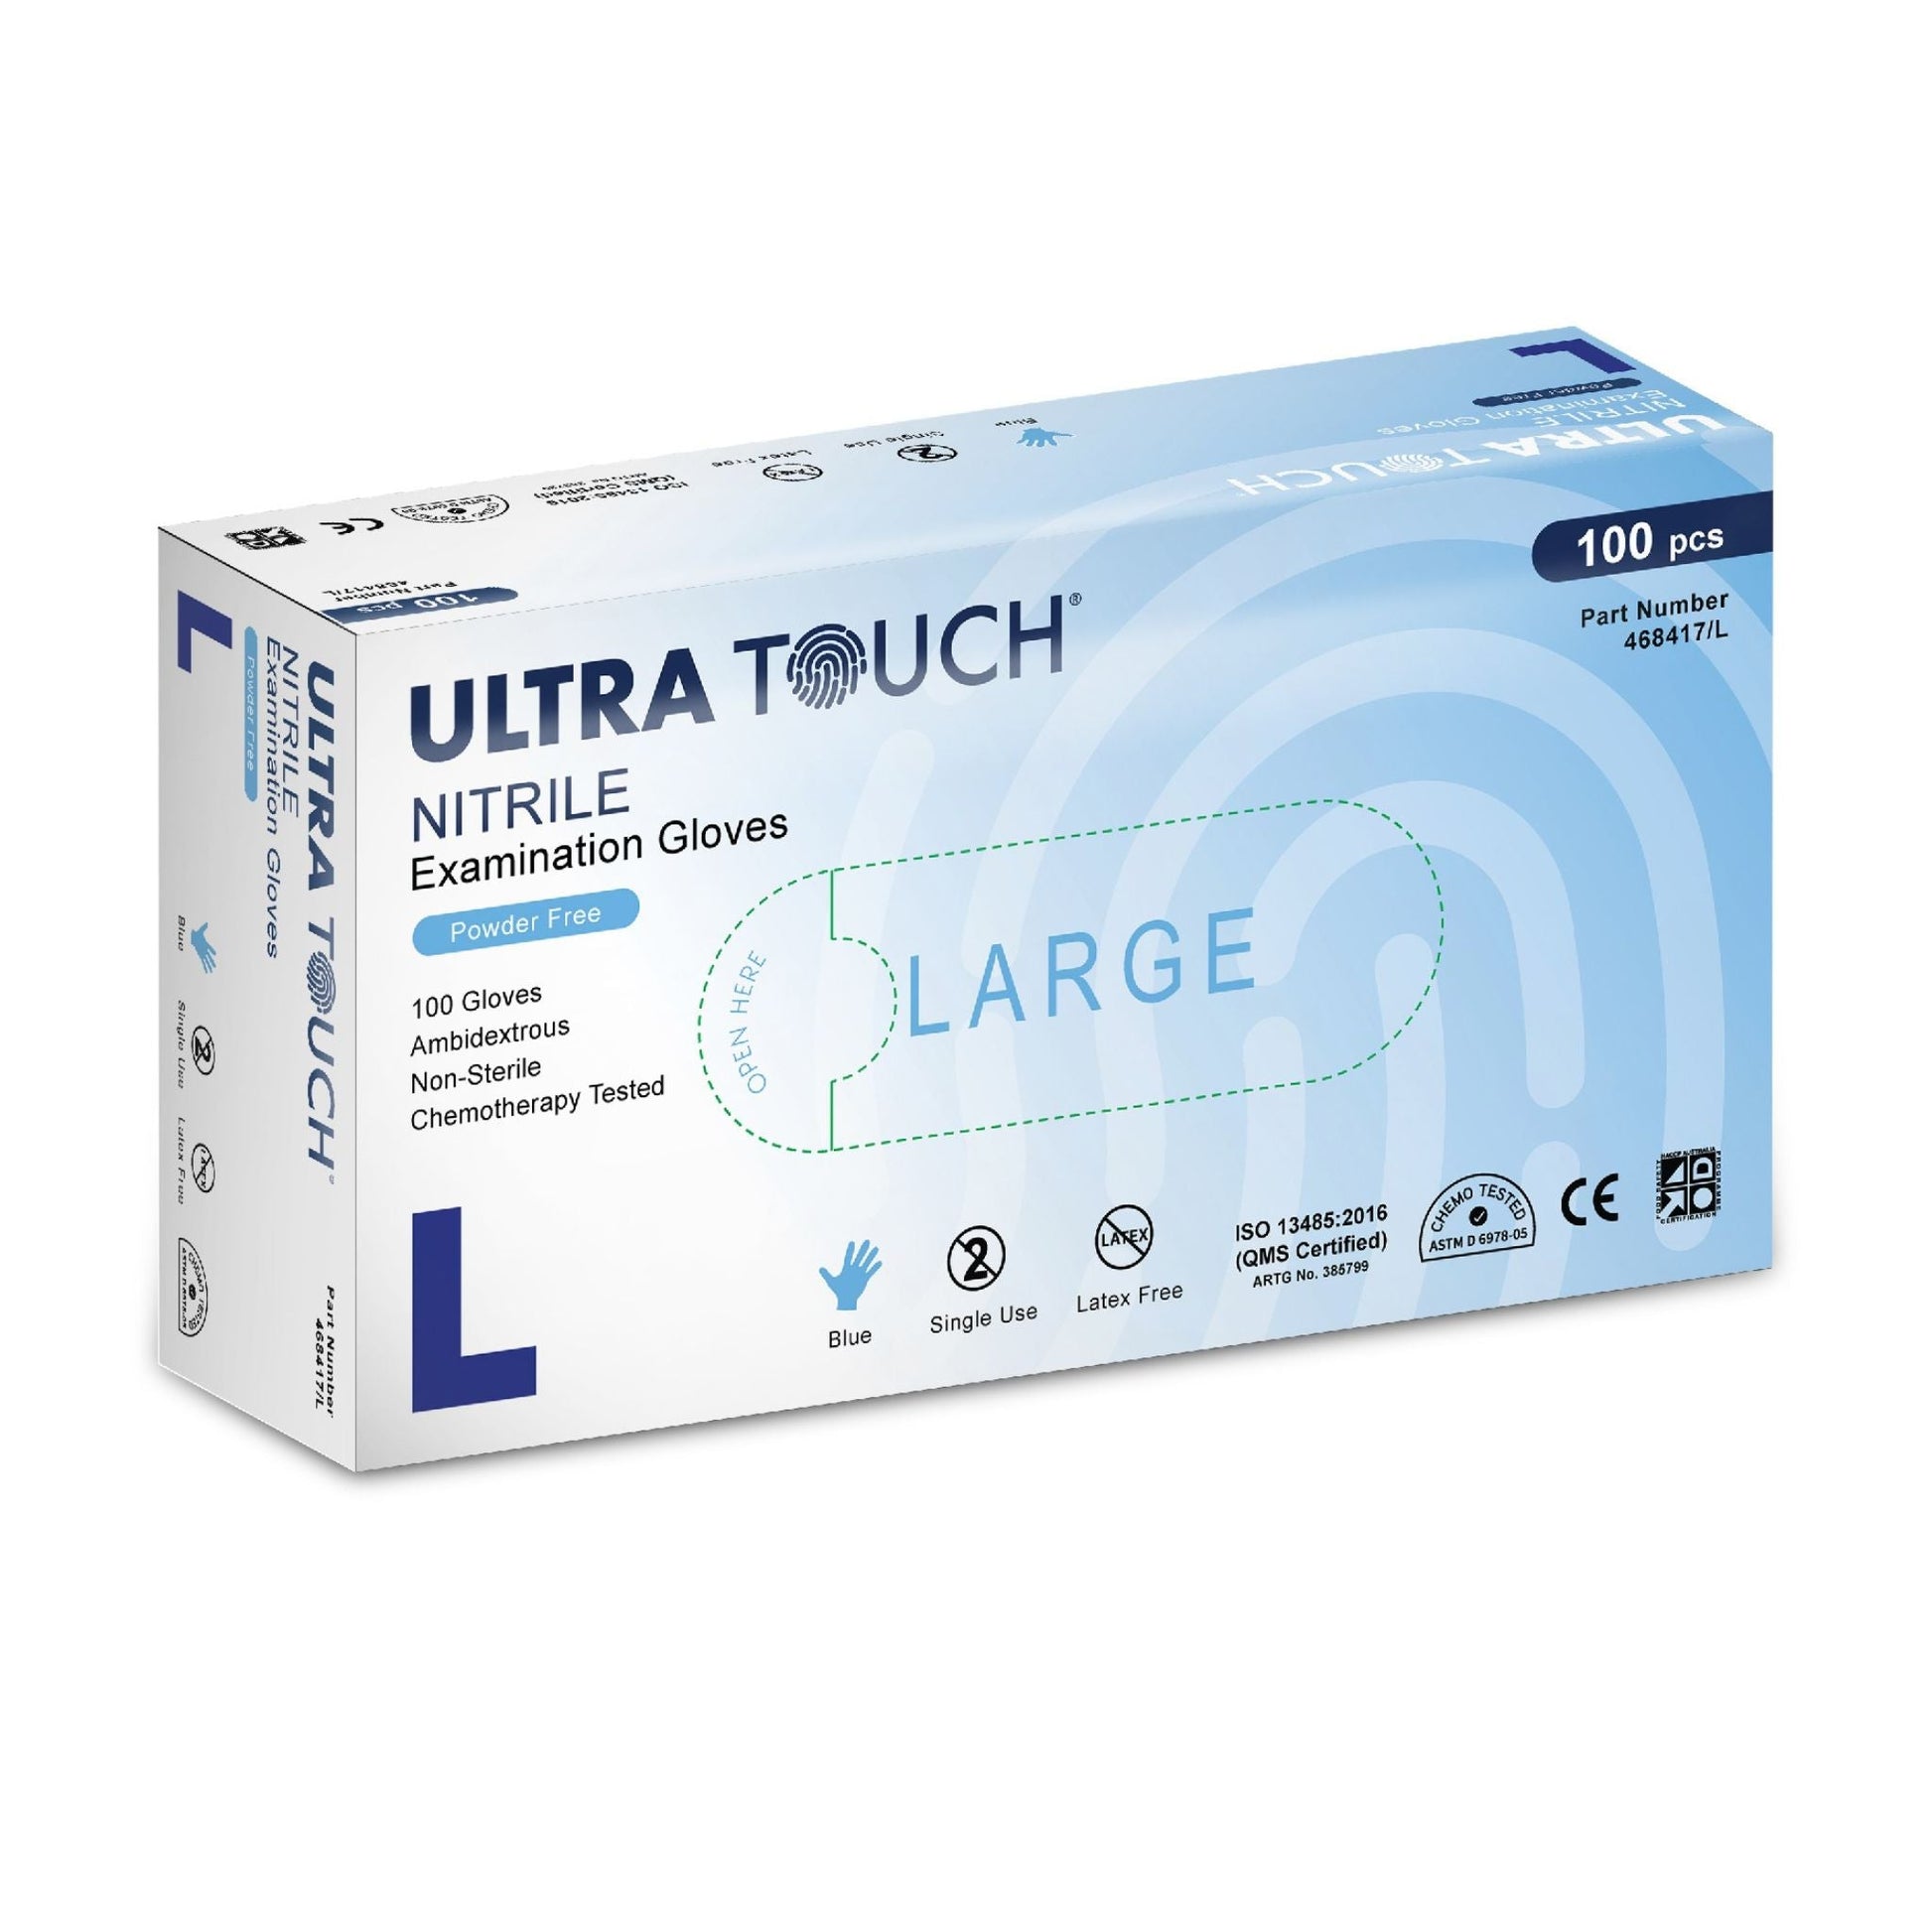 Ultra Touch Nitrile Chemo-tested Blue Powder Free Disposable Gloves Carton - L - Carton (1000pc)